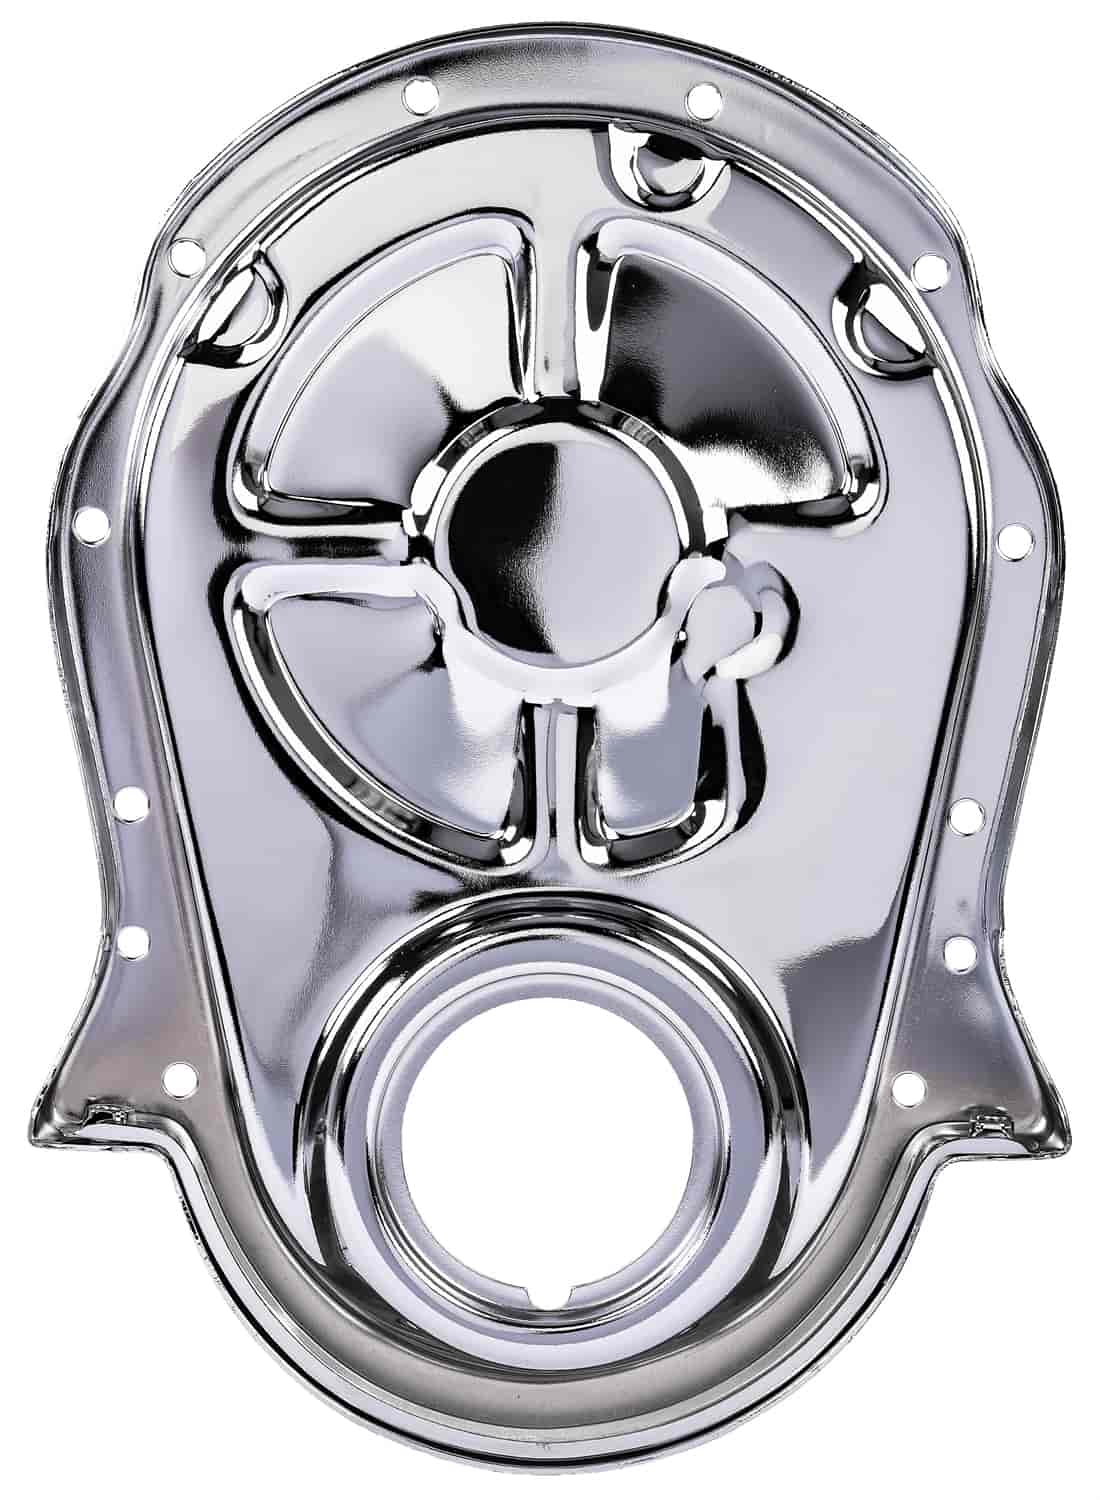 Timing Cover for 1966-1990 Big Block Chevy Mark